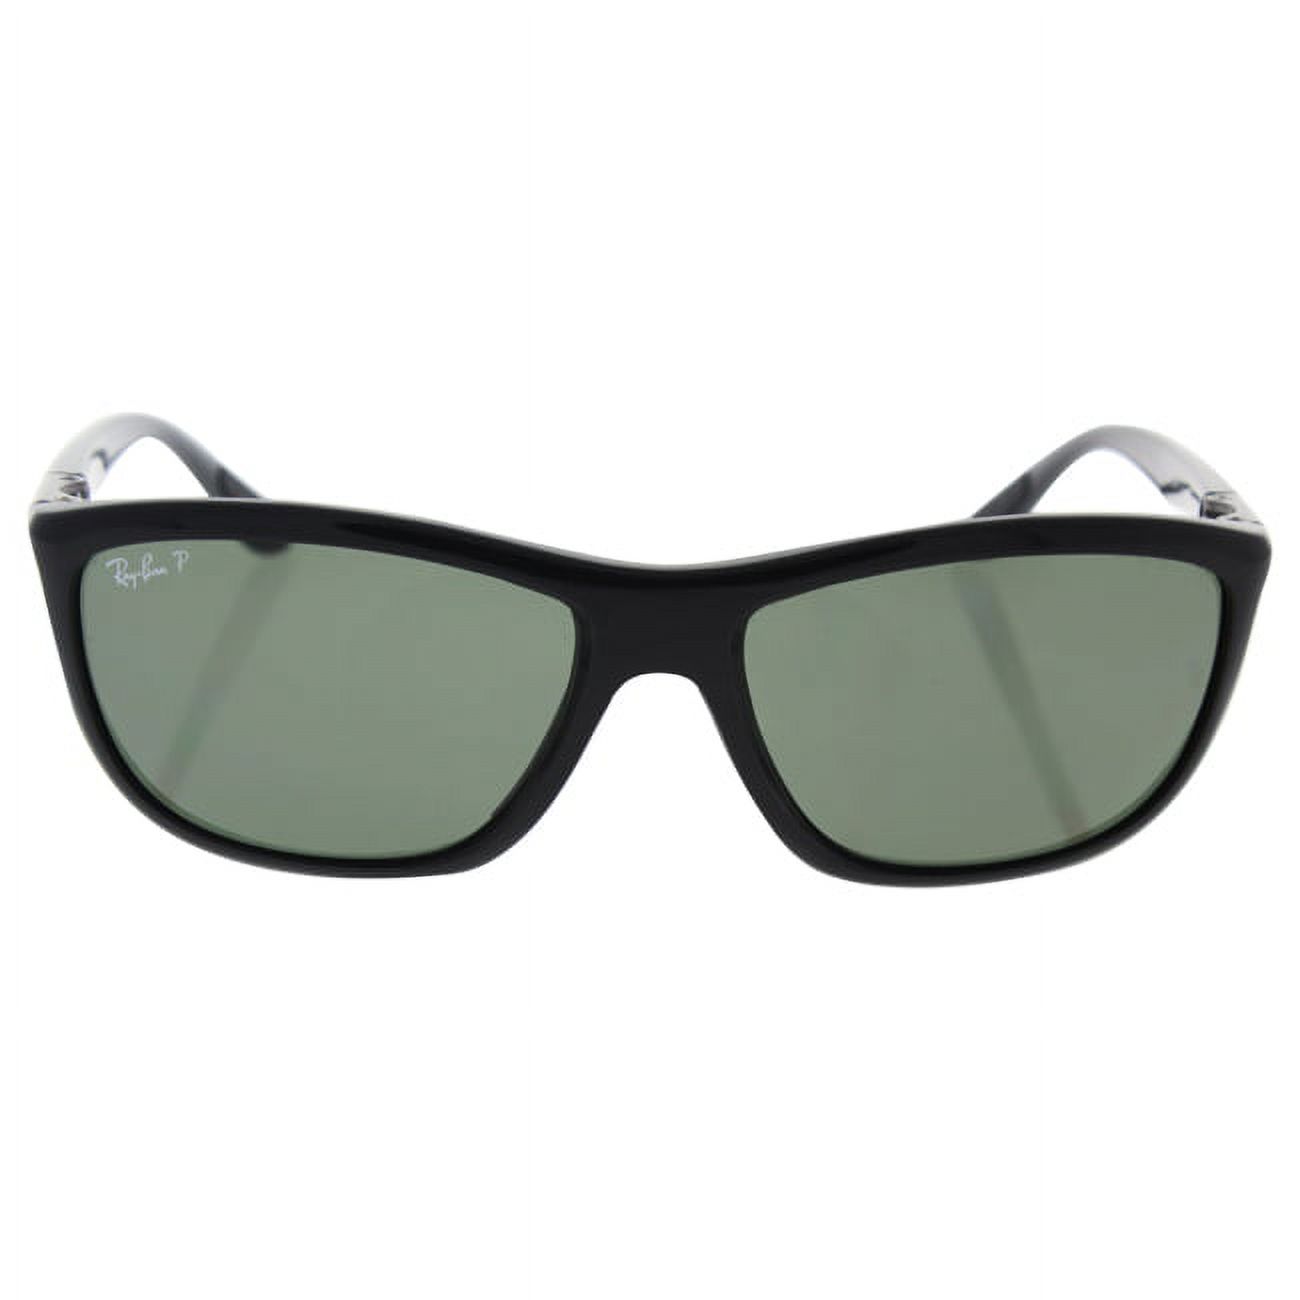 Sunglasses Ray-Ban RB 8351 62199A Black - image 1 of 2